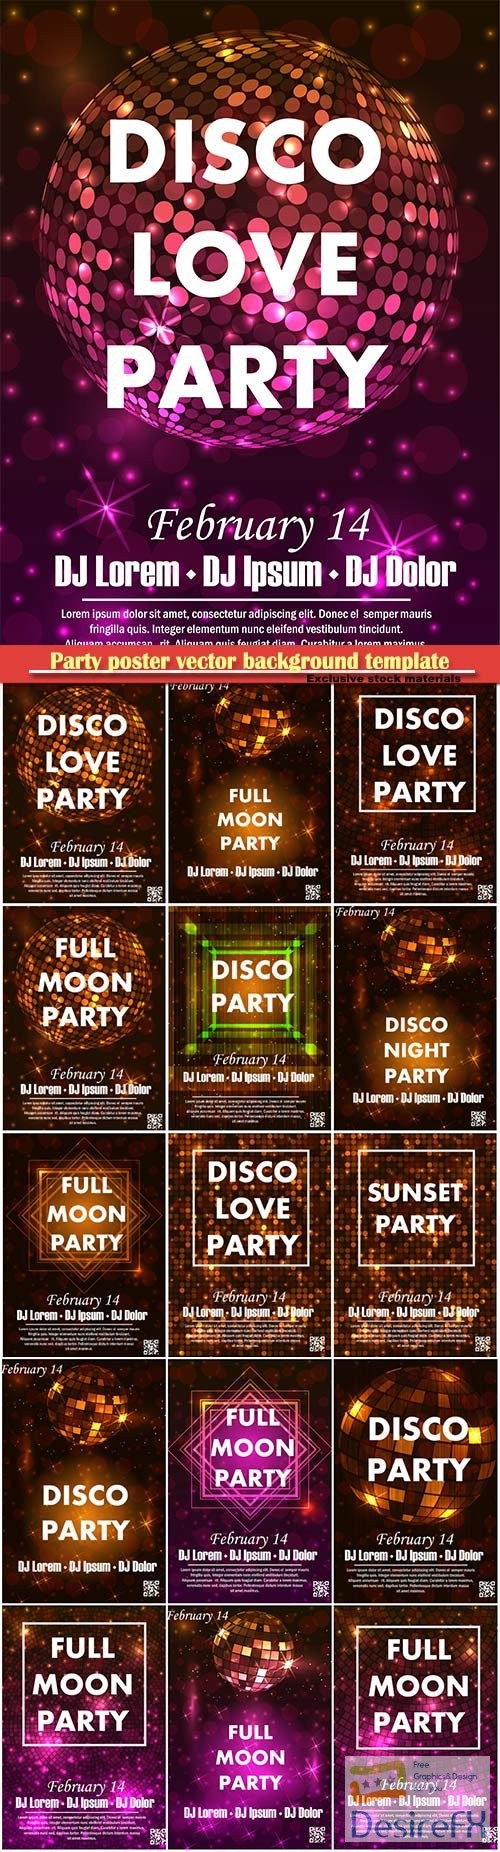 Party poster vector background template with particles and modern geometric shapes